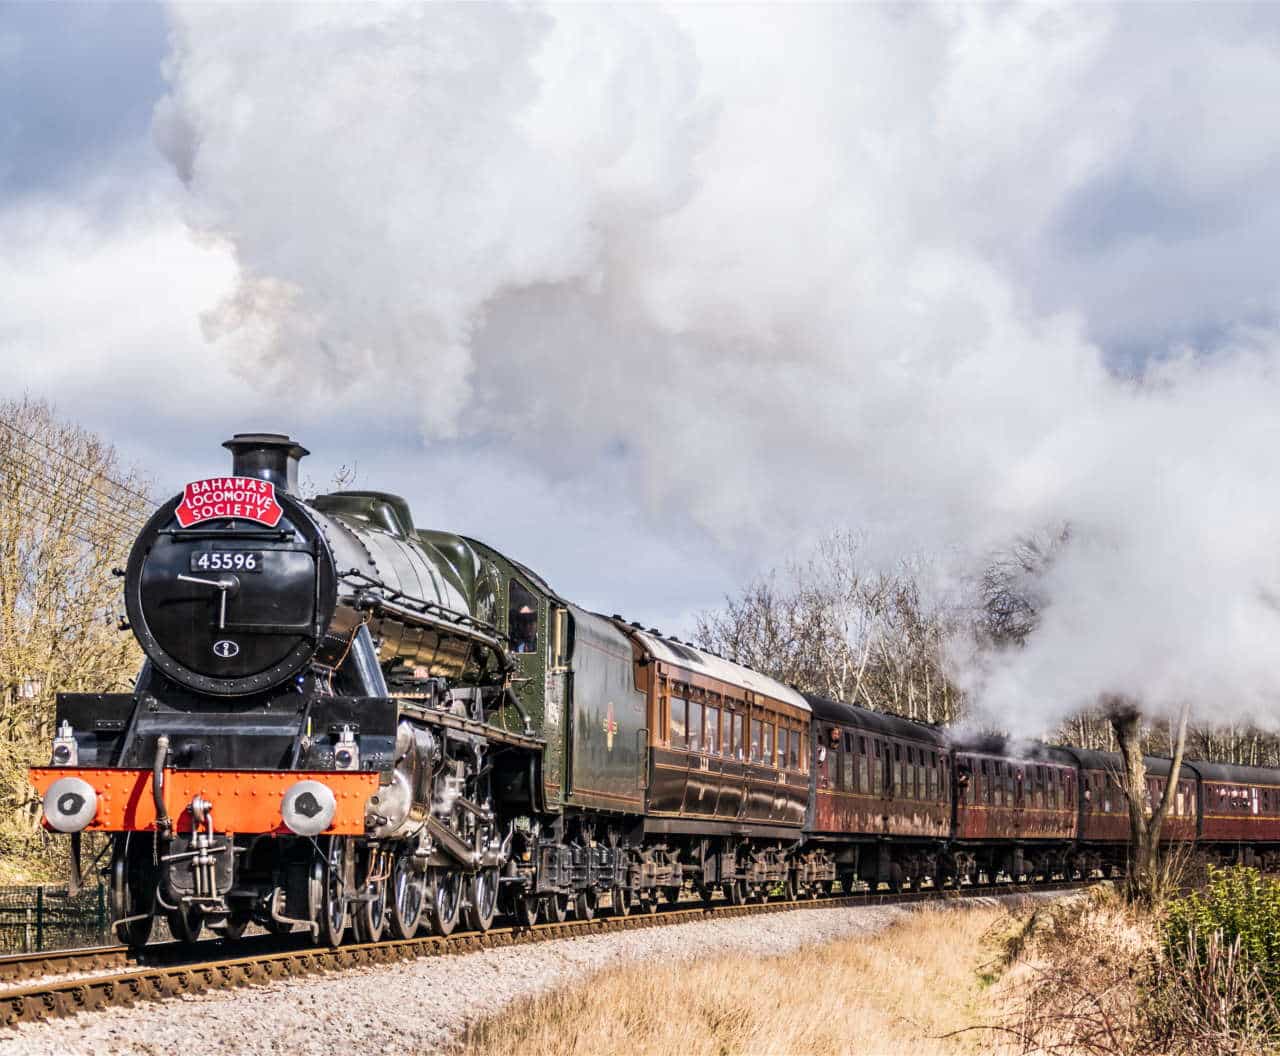 Where to see steam locomotive 45596 Bahamas this week as it visits Preston, Chester, Shrewsbury and Cardiff